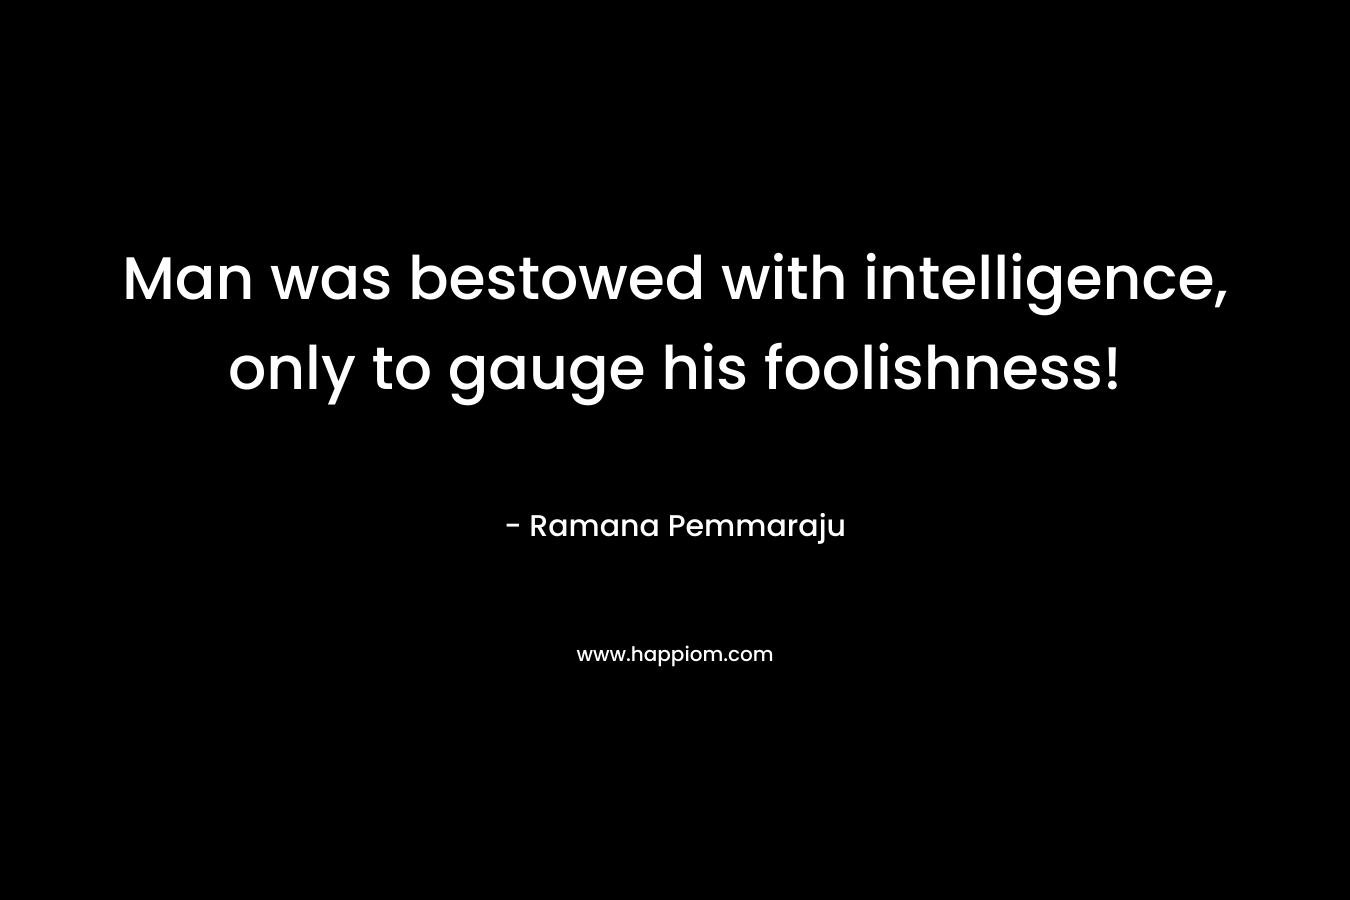 Man was bestowed with intelligence, only to gauge his foolishness! – Ramana Pemmaraju